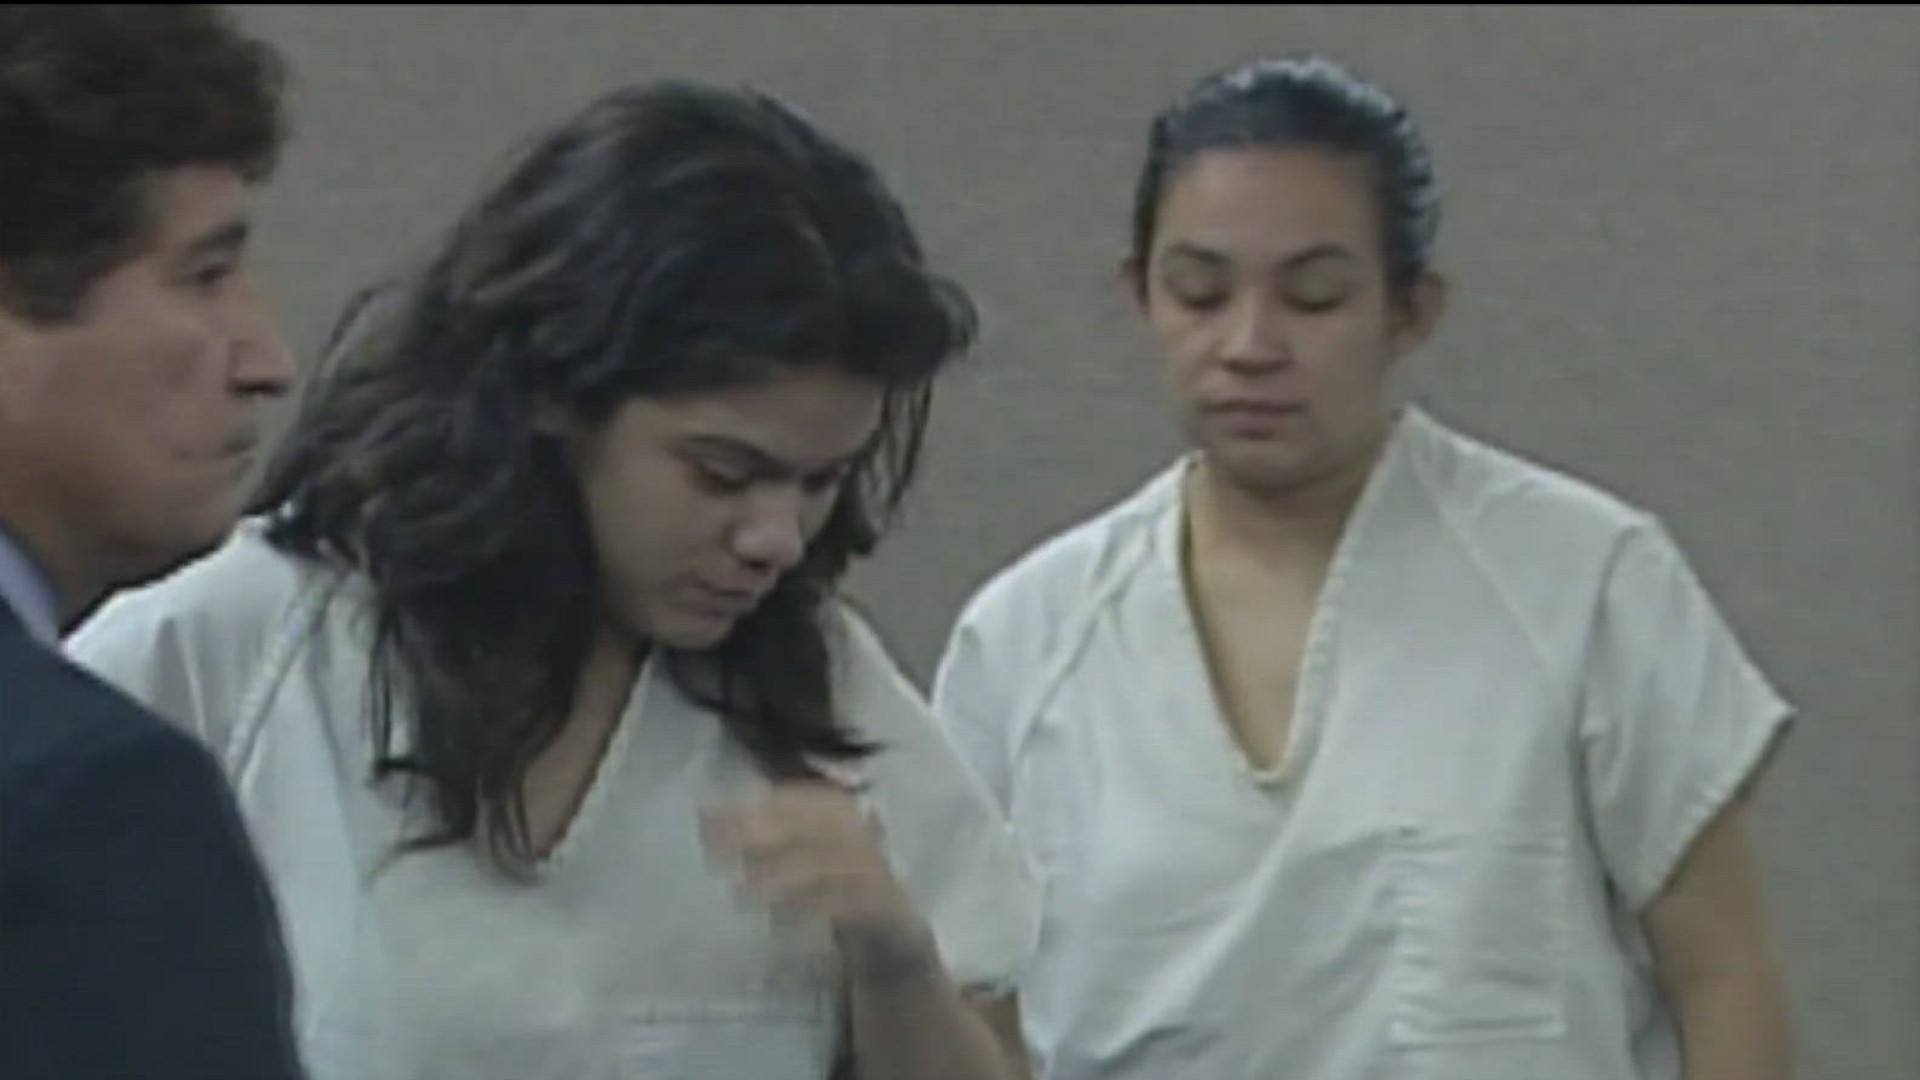 Christina Chavez was one of two women who were with John Henry Ramirez and pled guilty to robbing the convenience-store clerk in 2004.